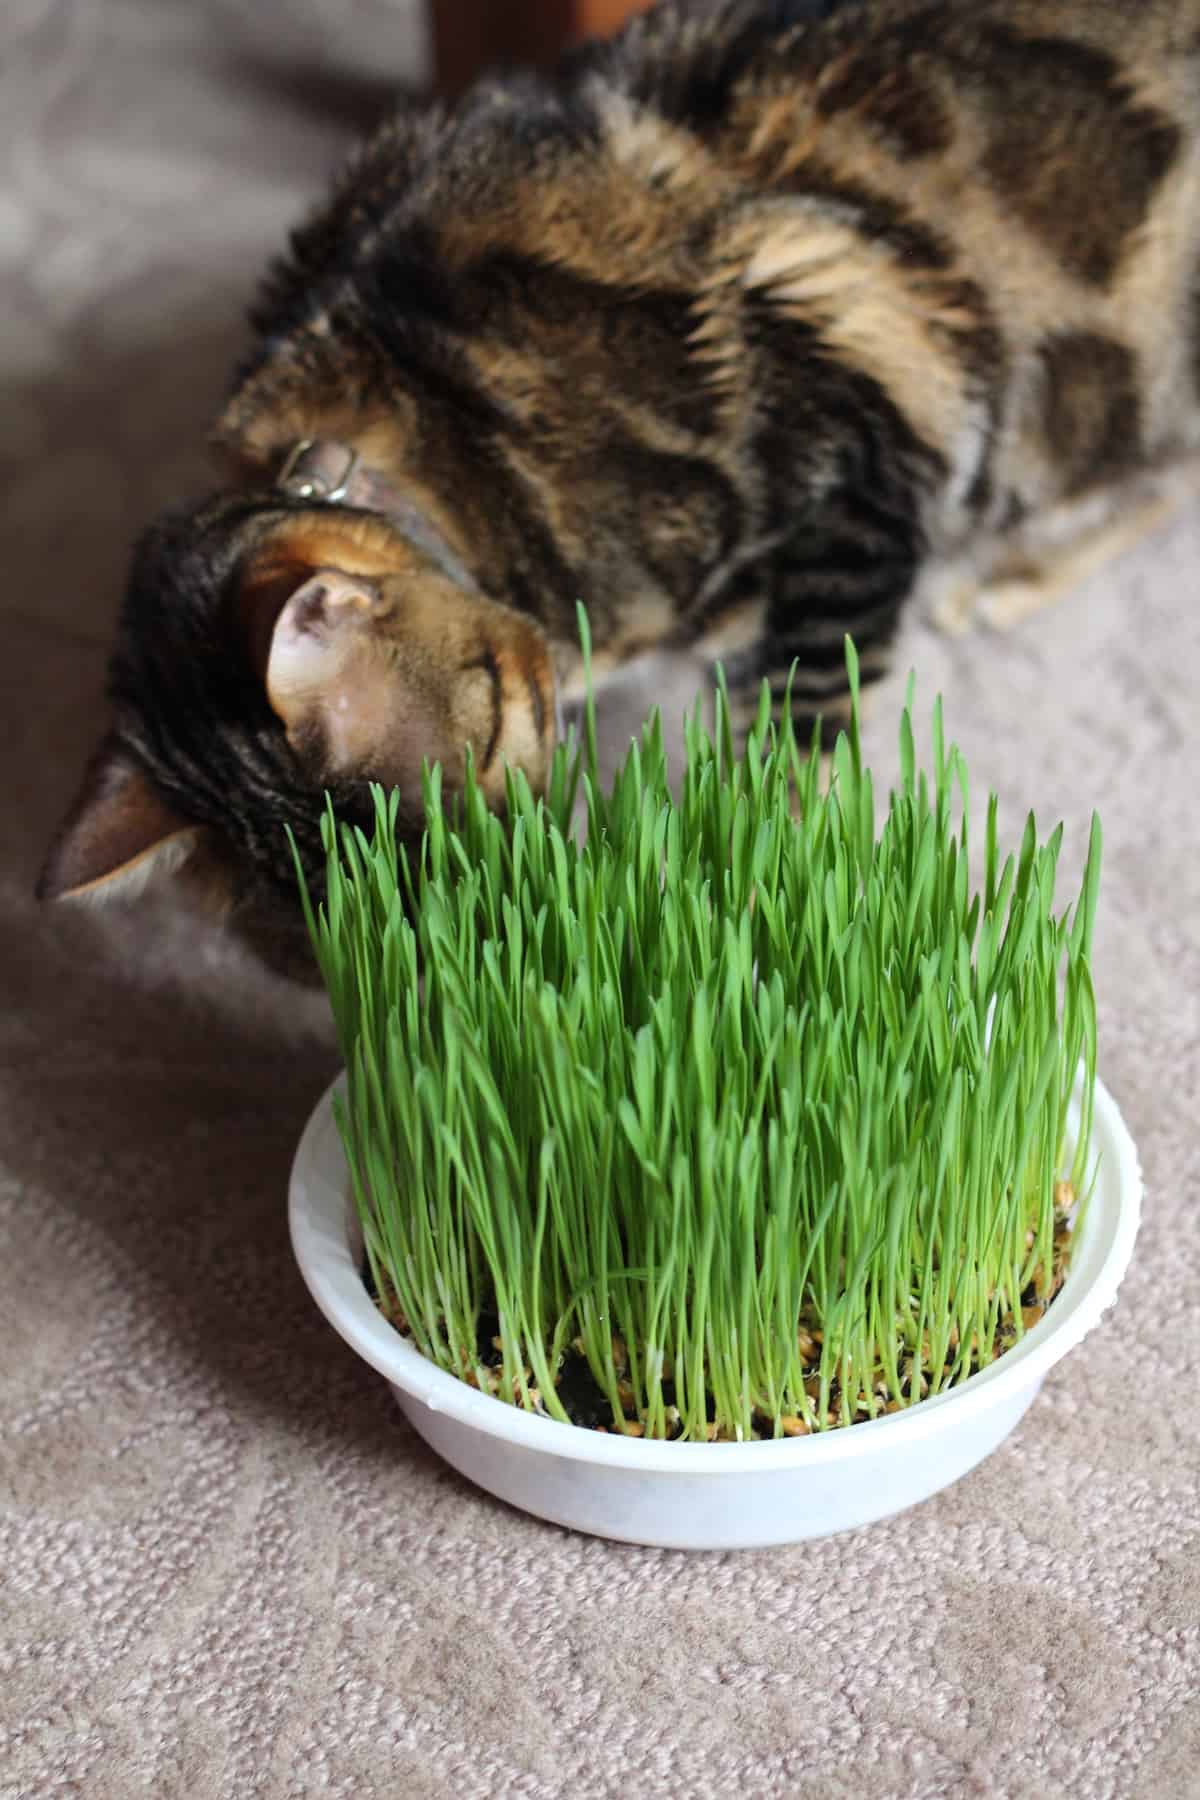 harvested cat grass 1ozapprox 800 seeds Kit Green including growing guide